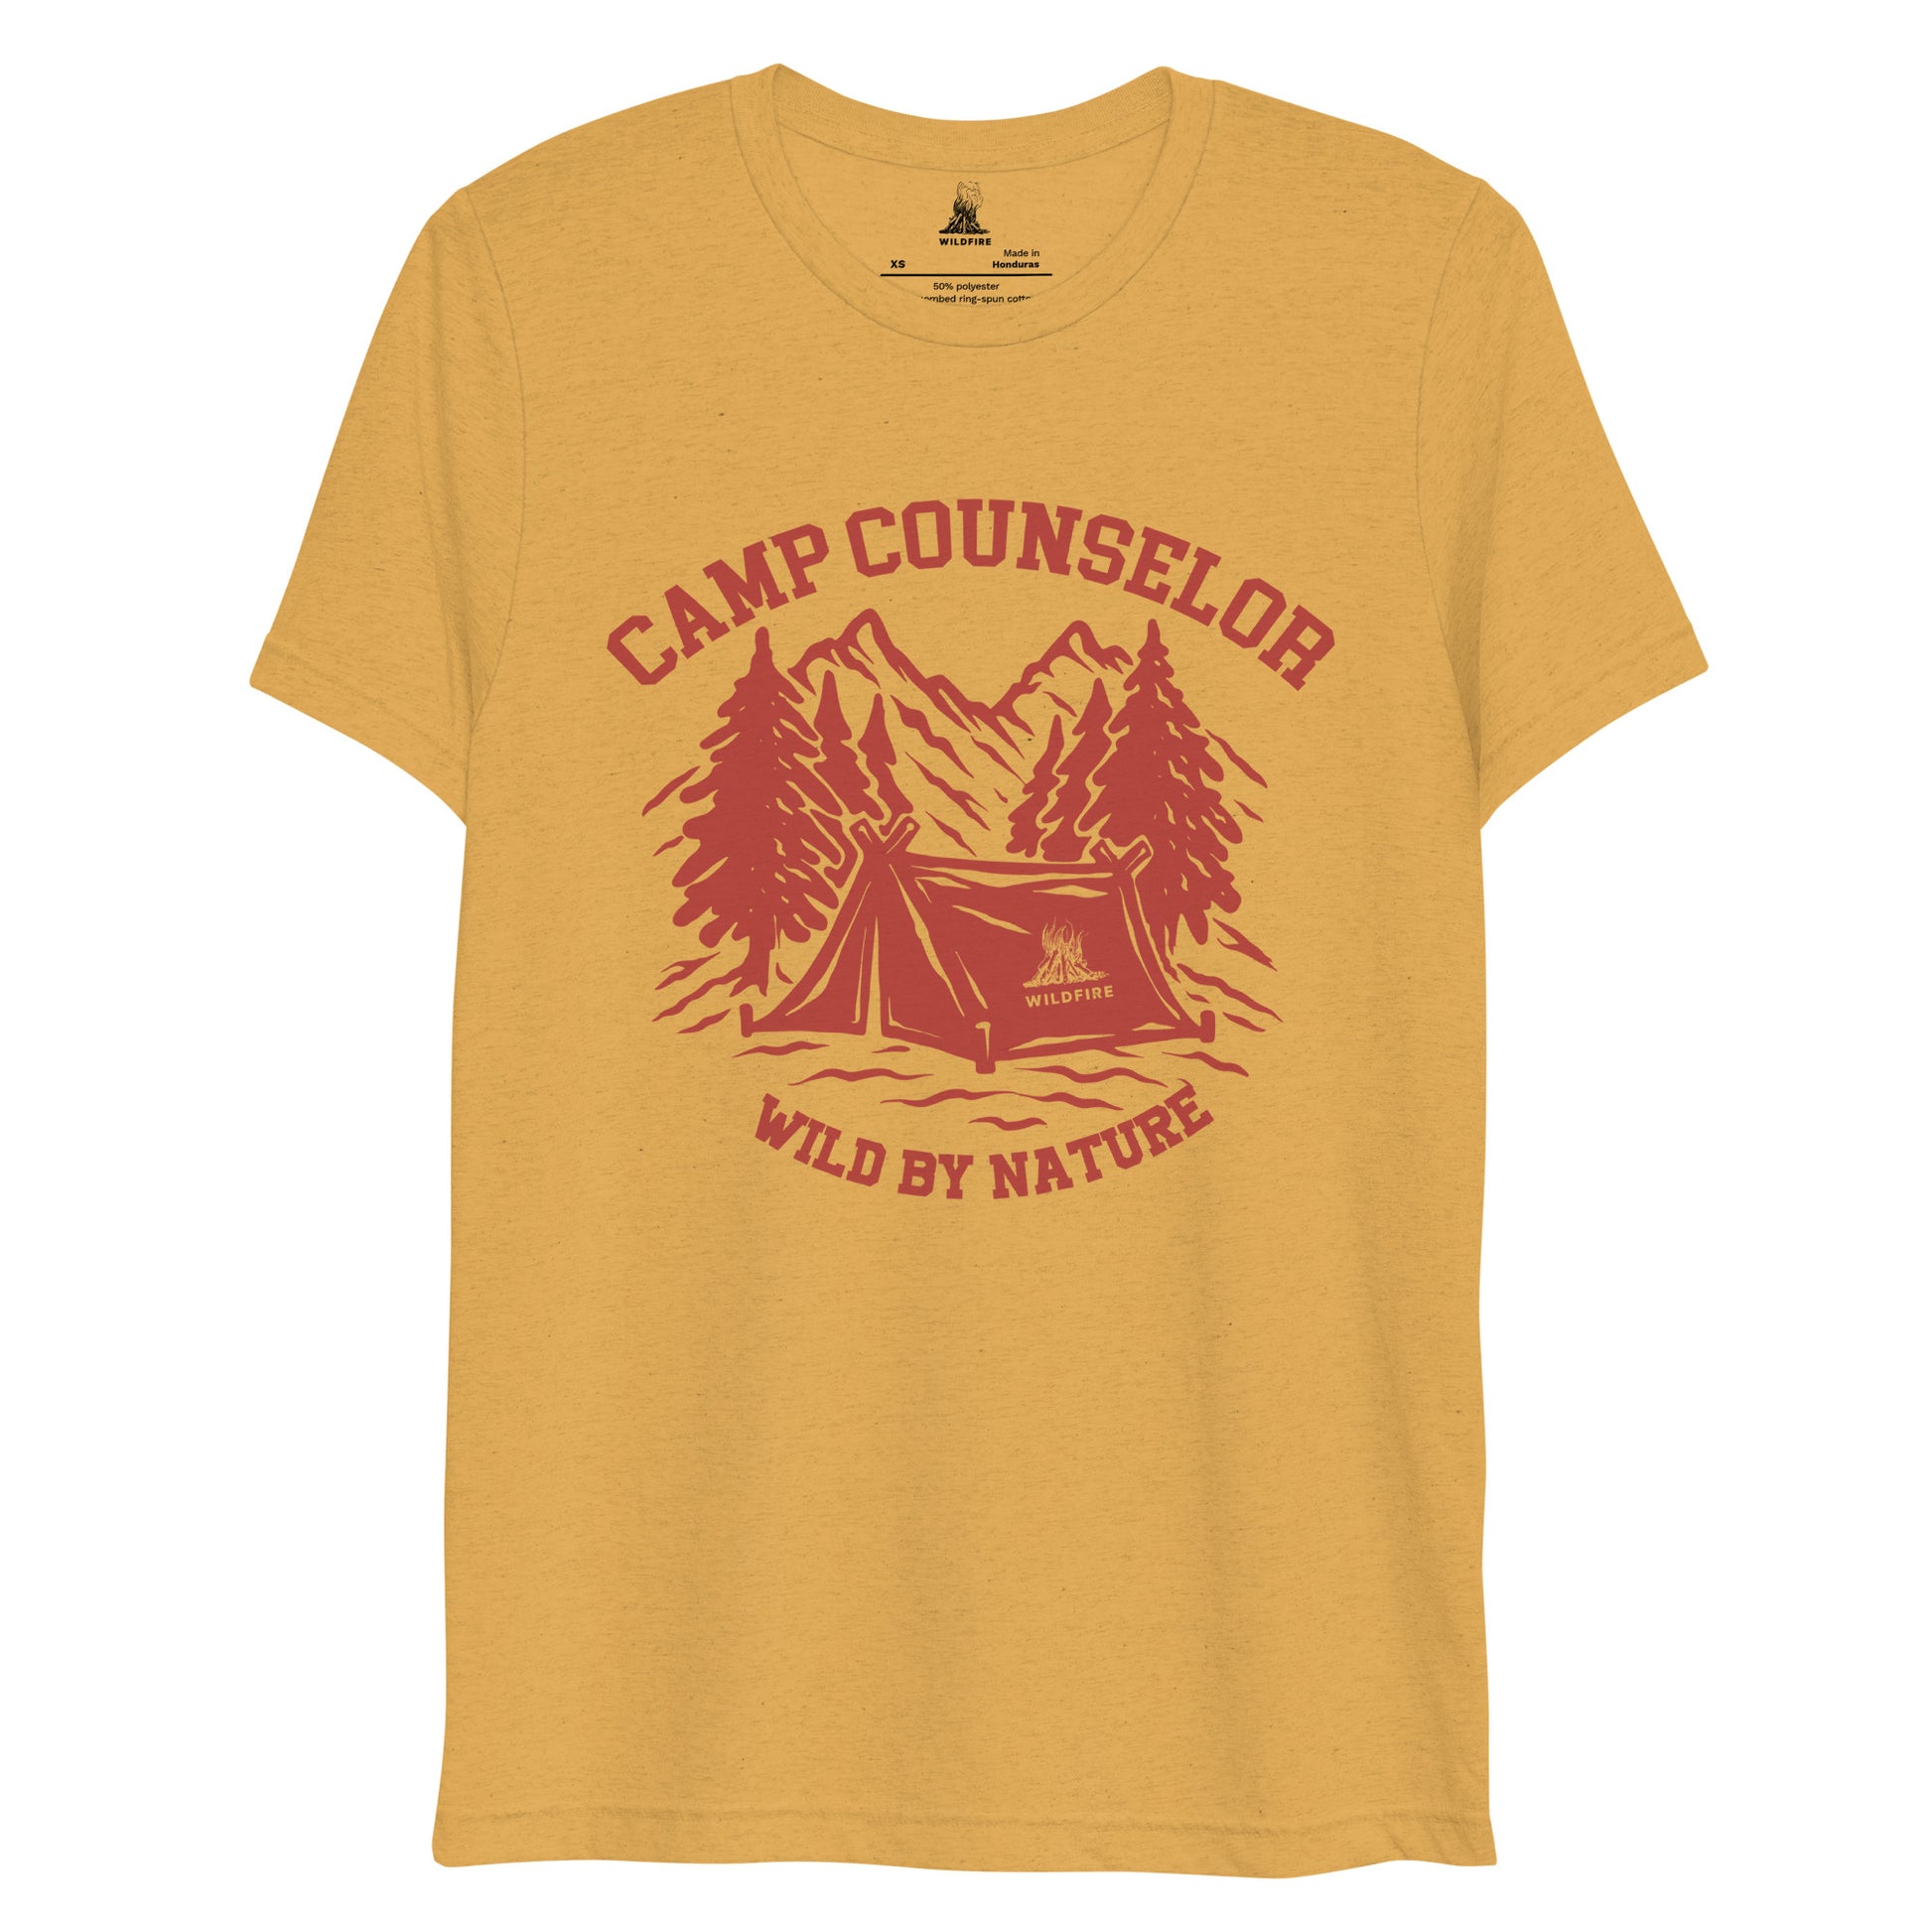 Wildfire Cigars Camp Counselor tri-blend red on mustard t-shirt from the front